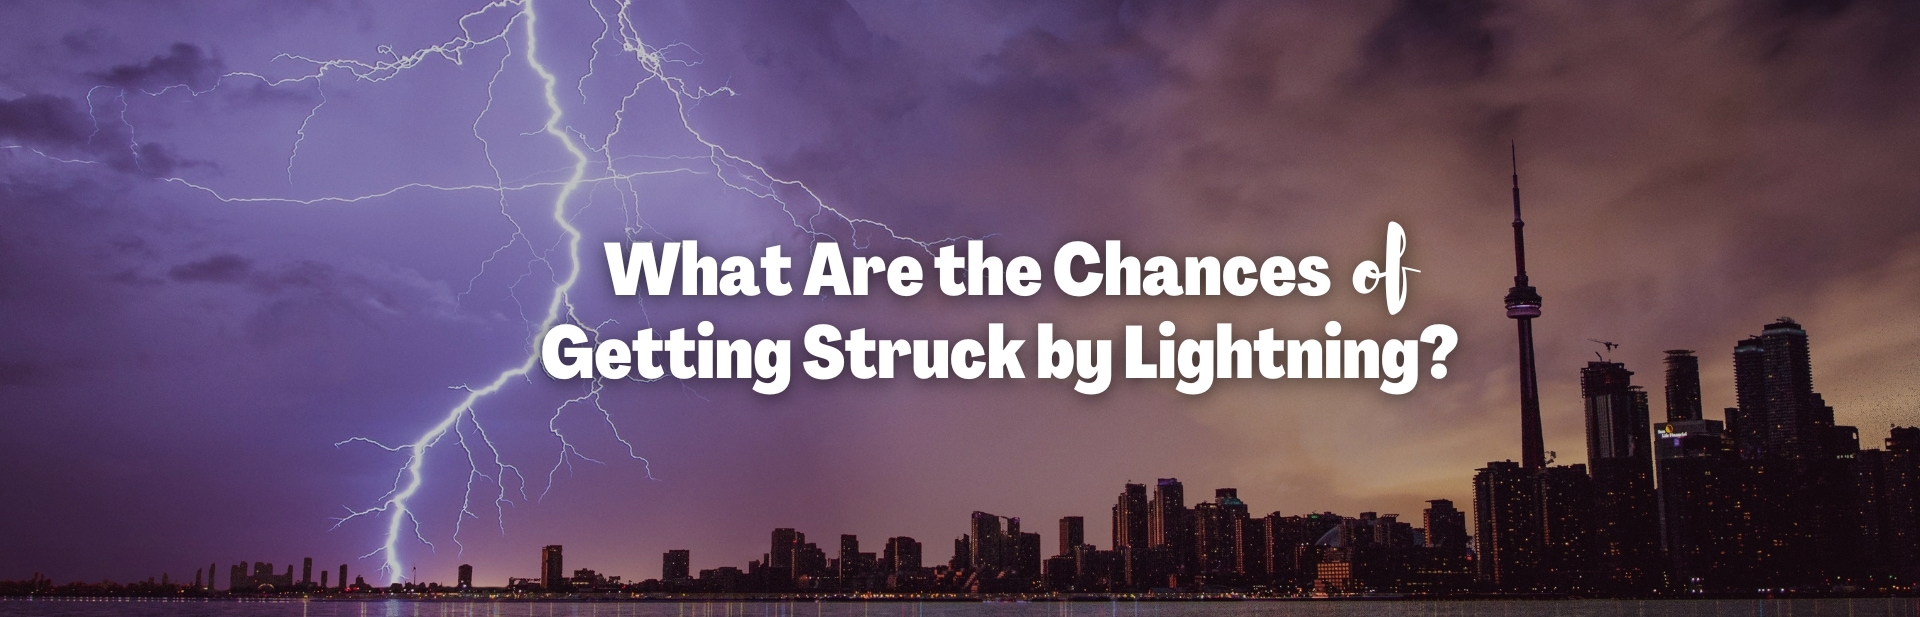 What Are the Chances of Getting Struck by Lightning?